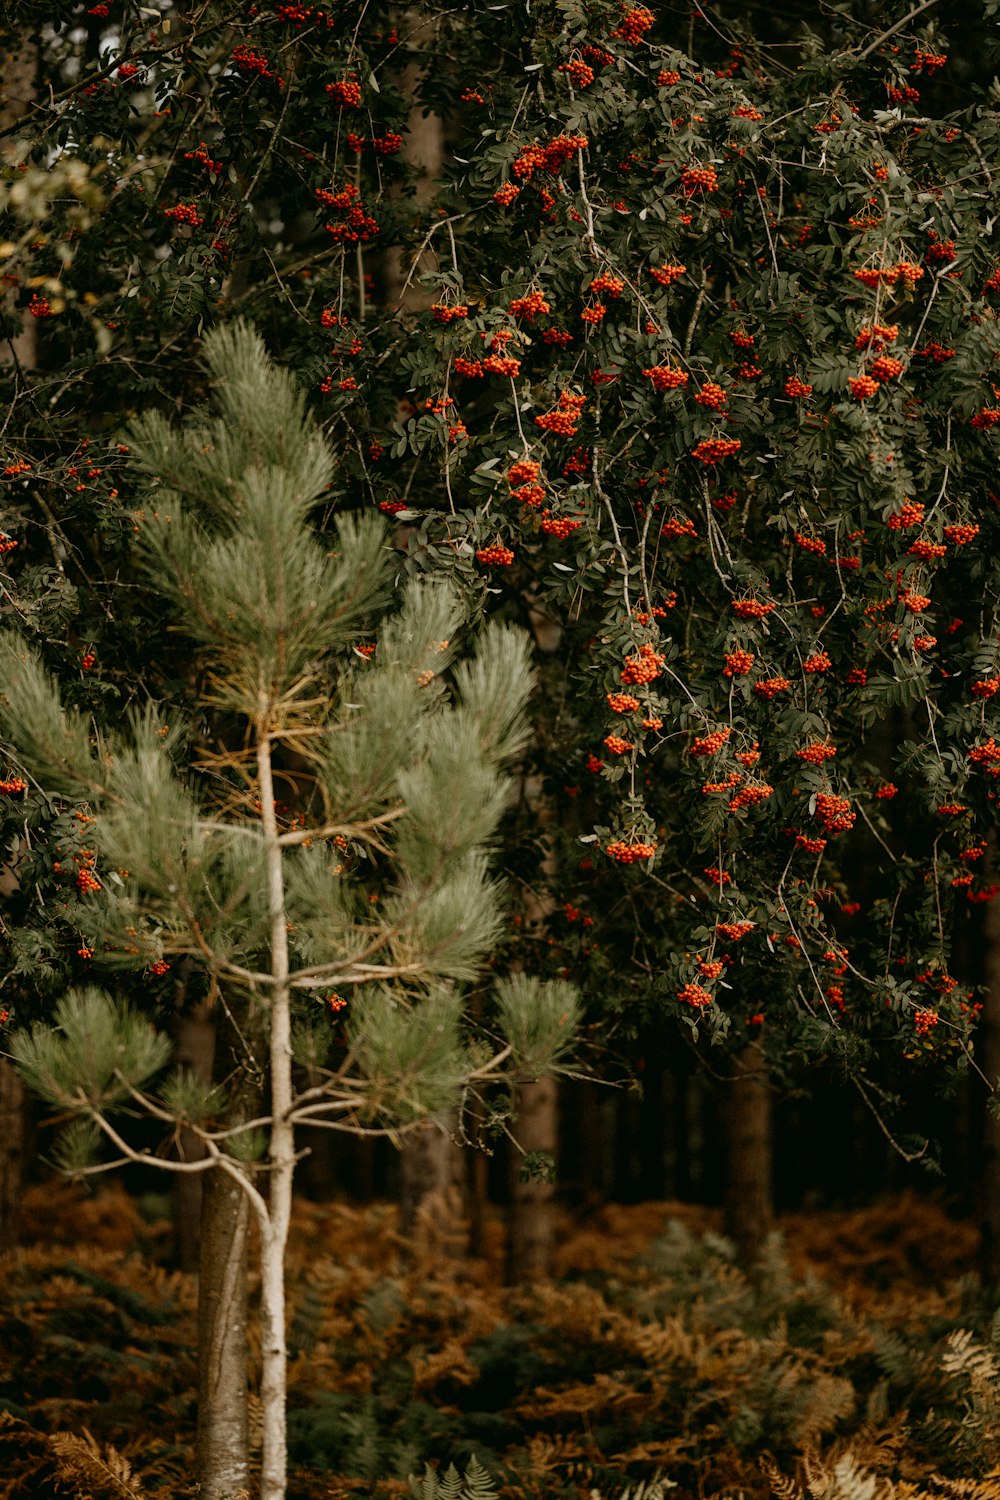 a pine tree with red berries on it